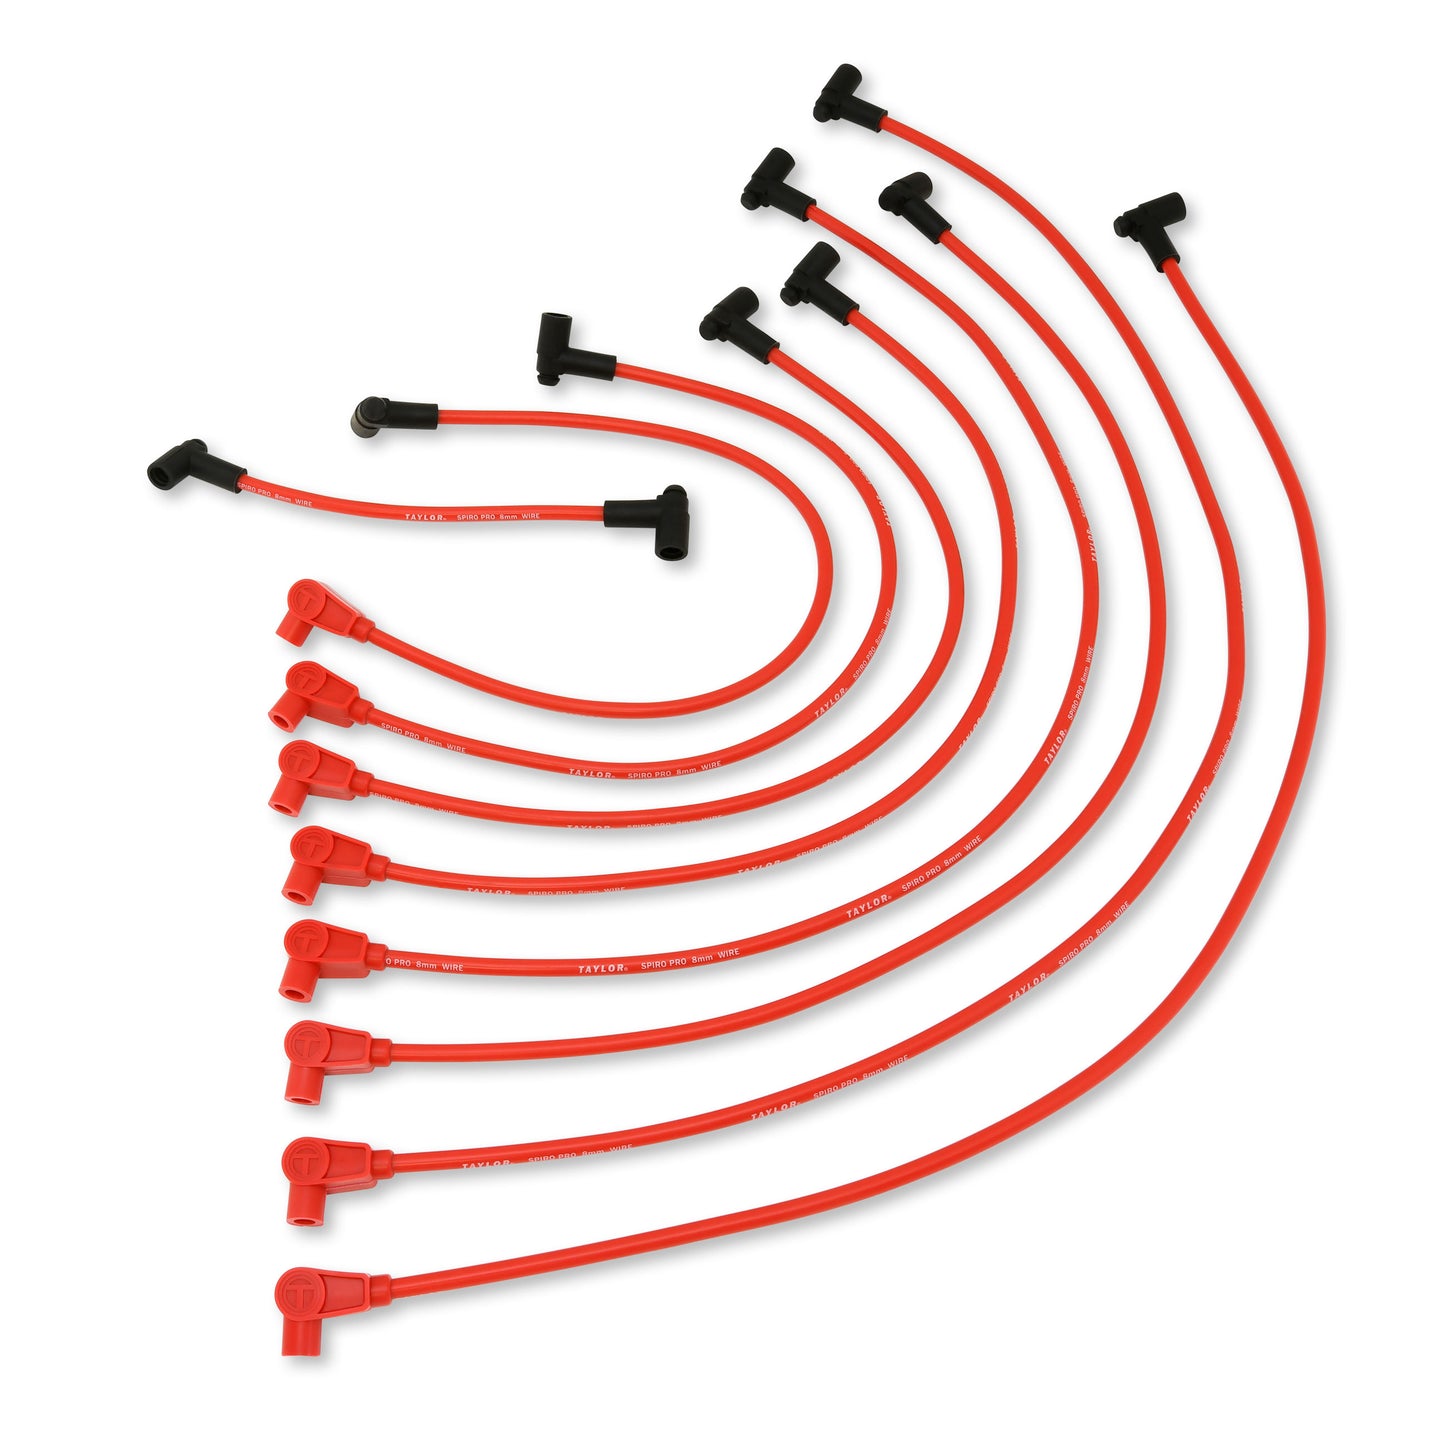 Taylor Cable 74226 8mm Spiro-Pro Custom Spark Plug Wires 8 cyl red